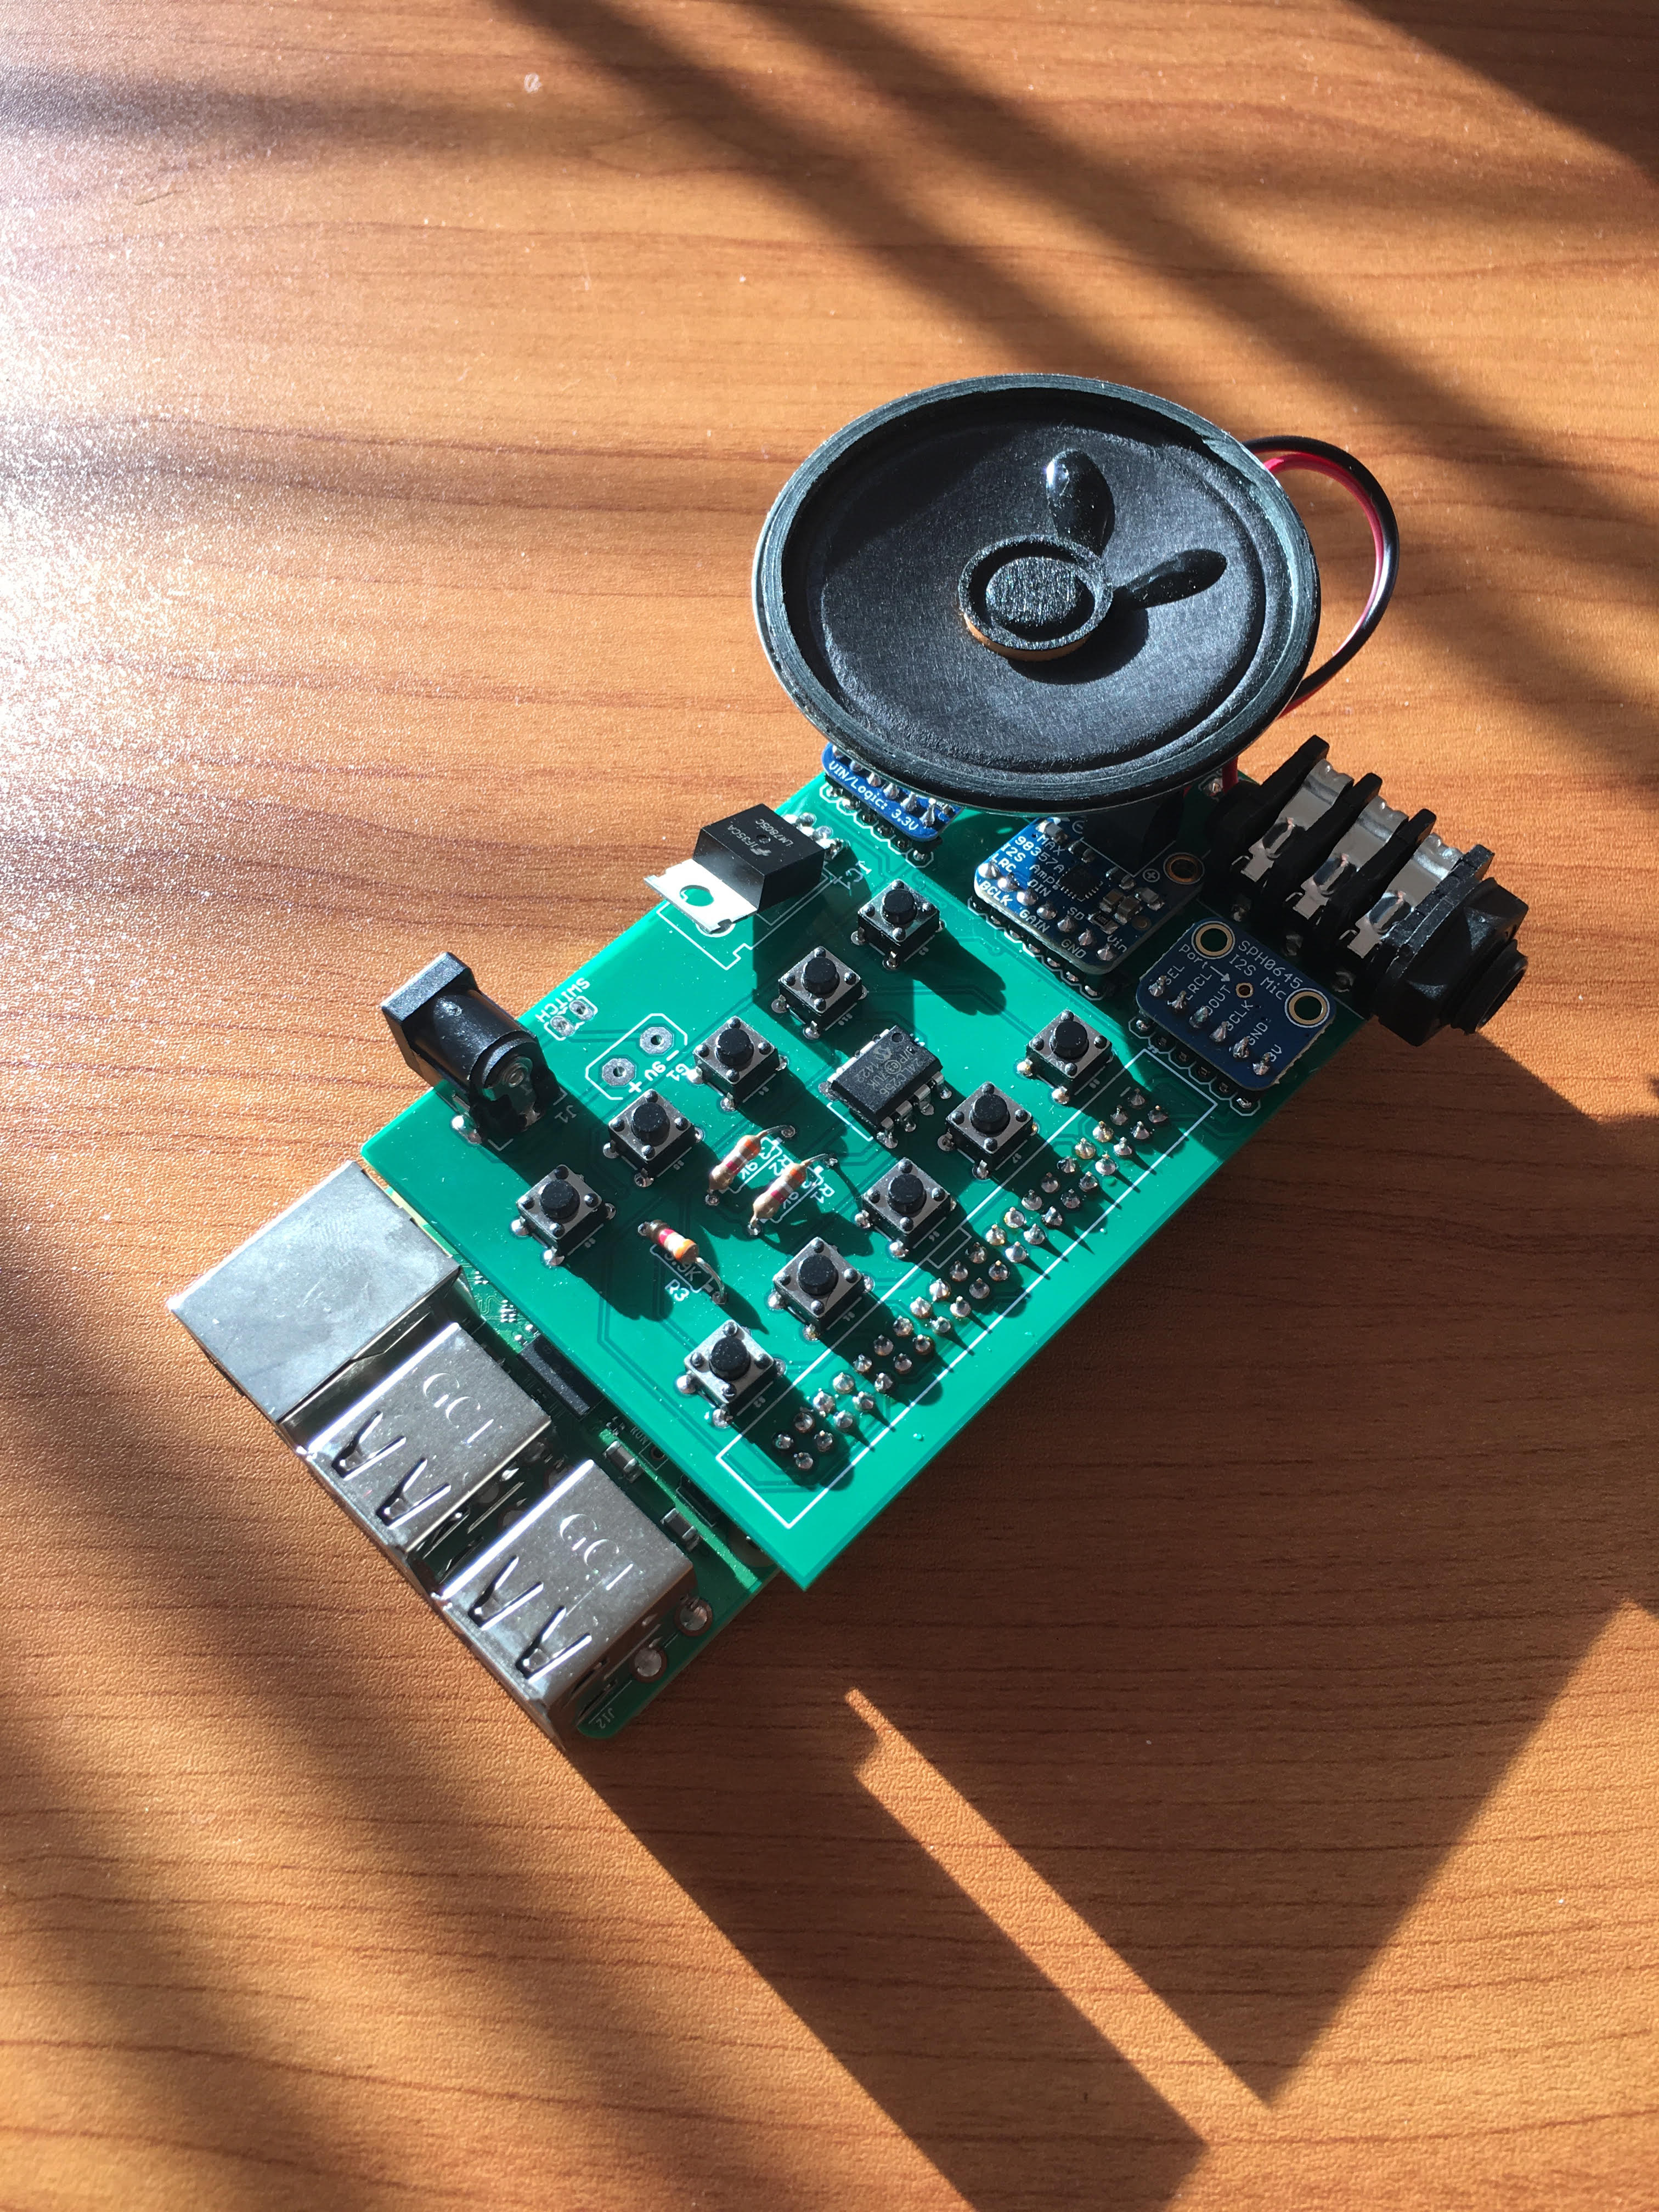 Small computer board with speaker